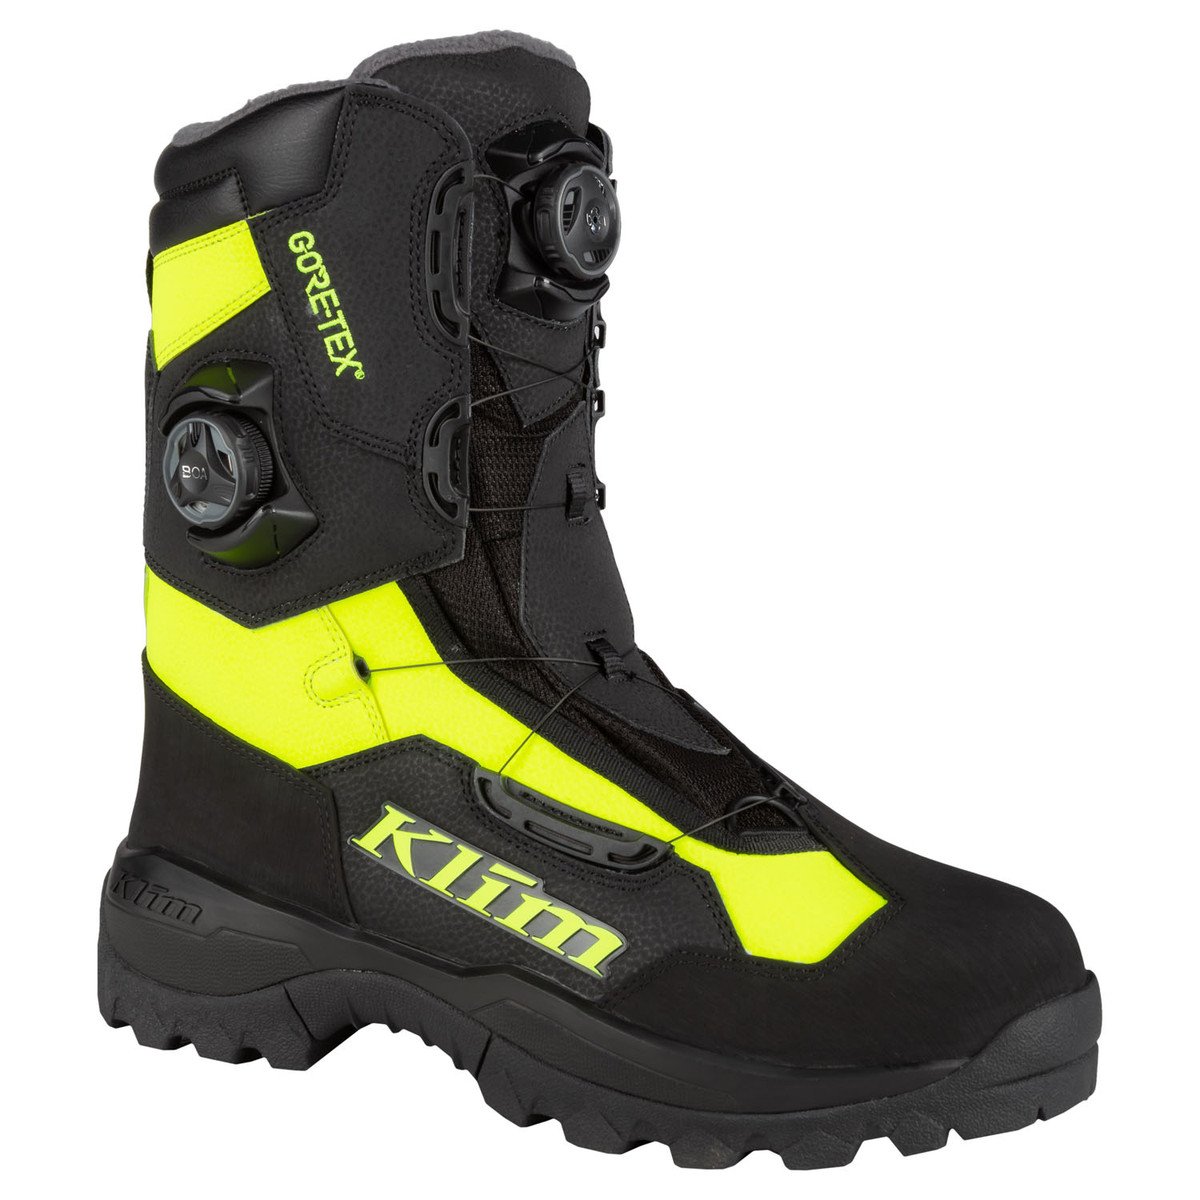 Klim Snowmobile Boots Online Shop, UP TO 66% OFF